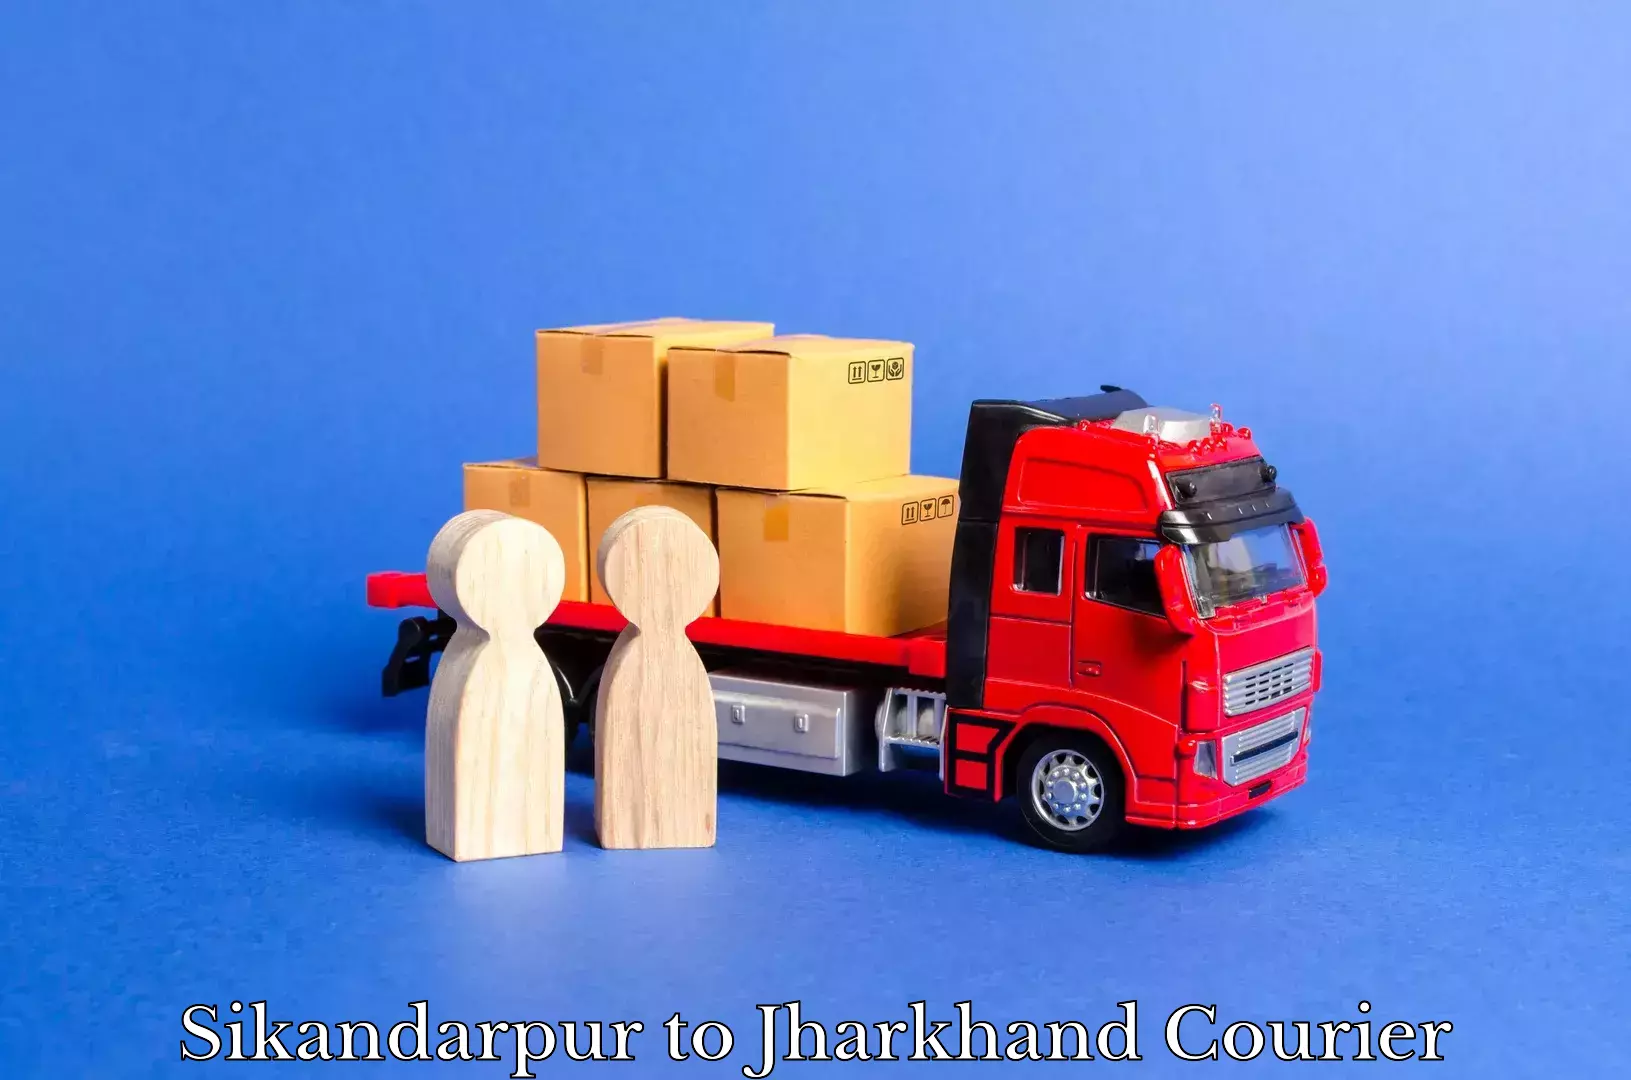 Global delivery options in Sikandarpur to Jharkhand